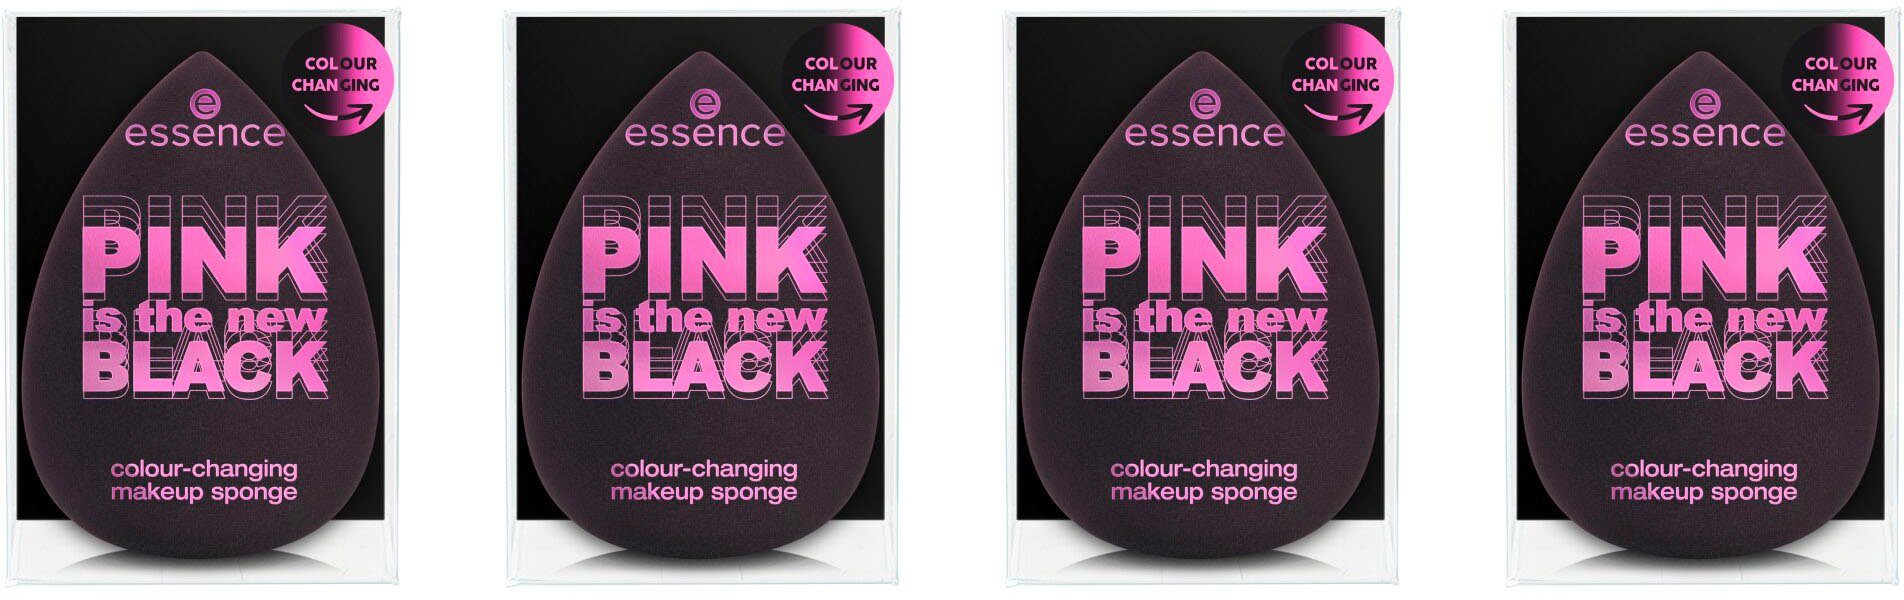 the new makeup is Make-up PINK Colour-changing Essence BLACK sponge, Schwamm colour-changing